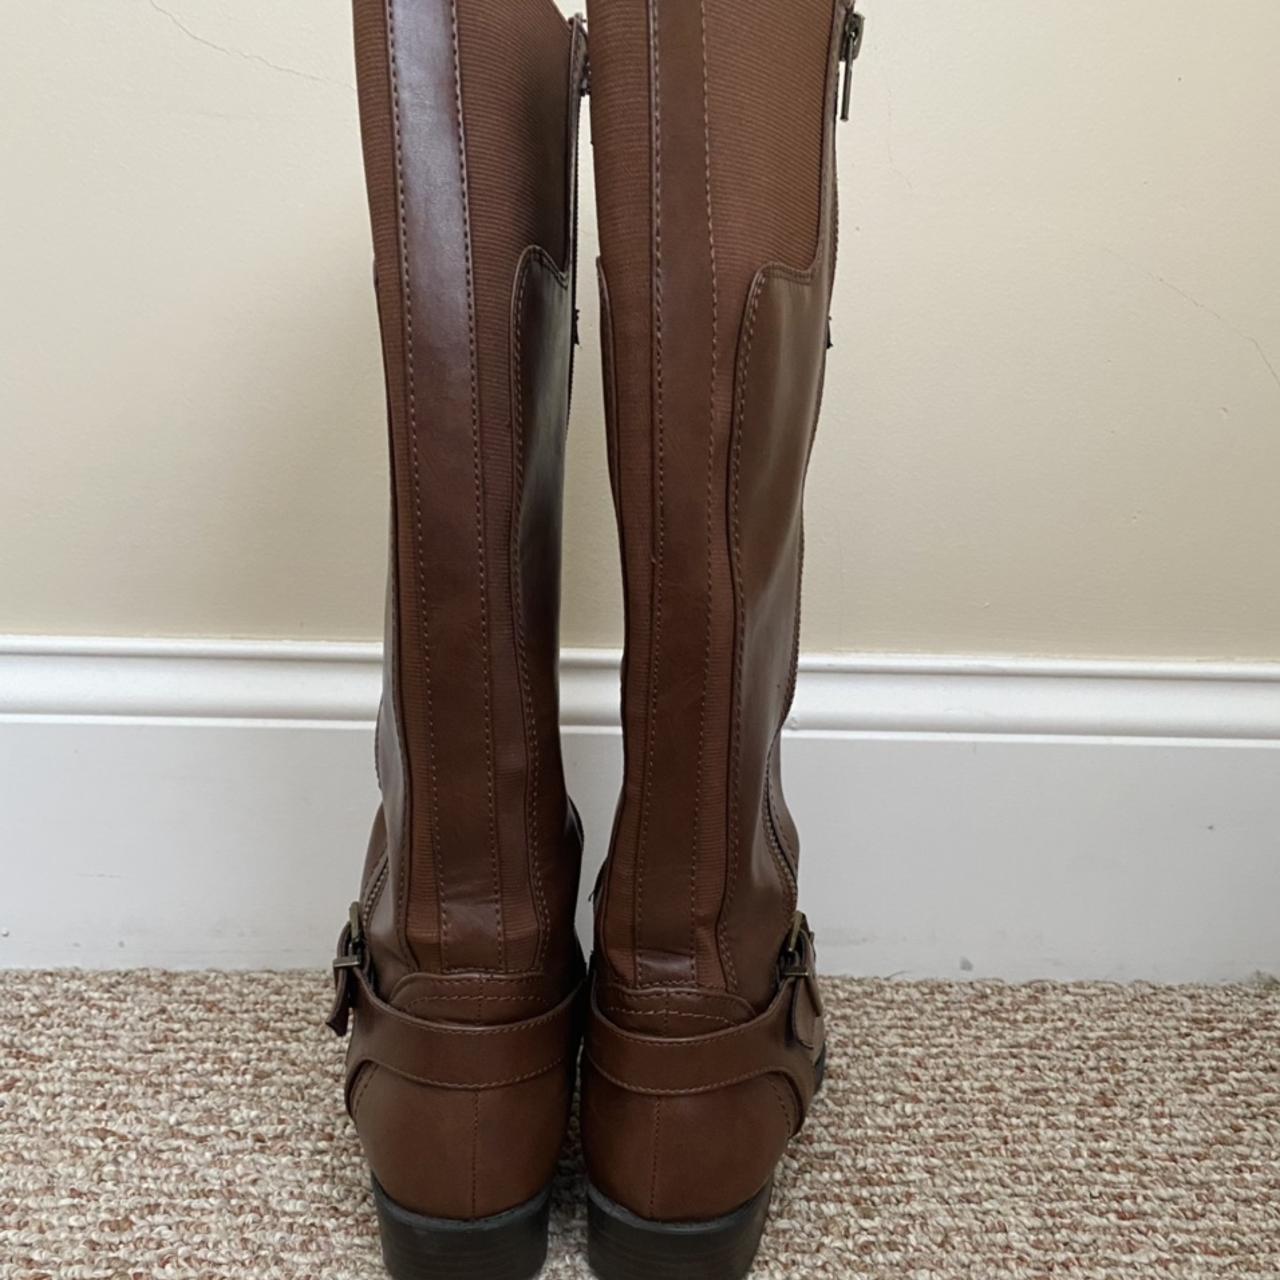 Target Women's Brown and Gold Boots (4)